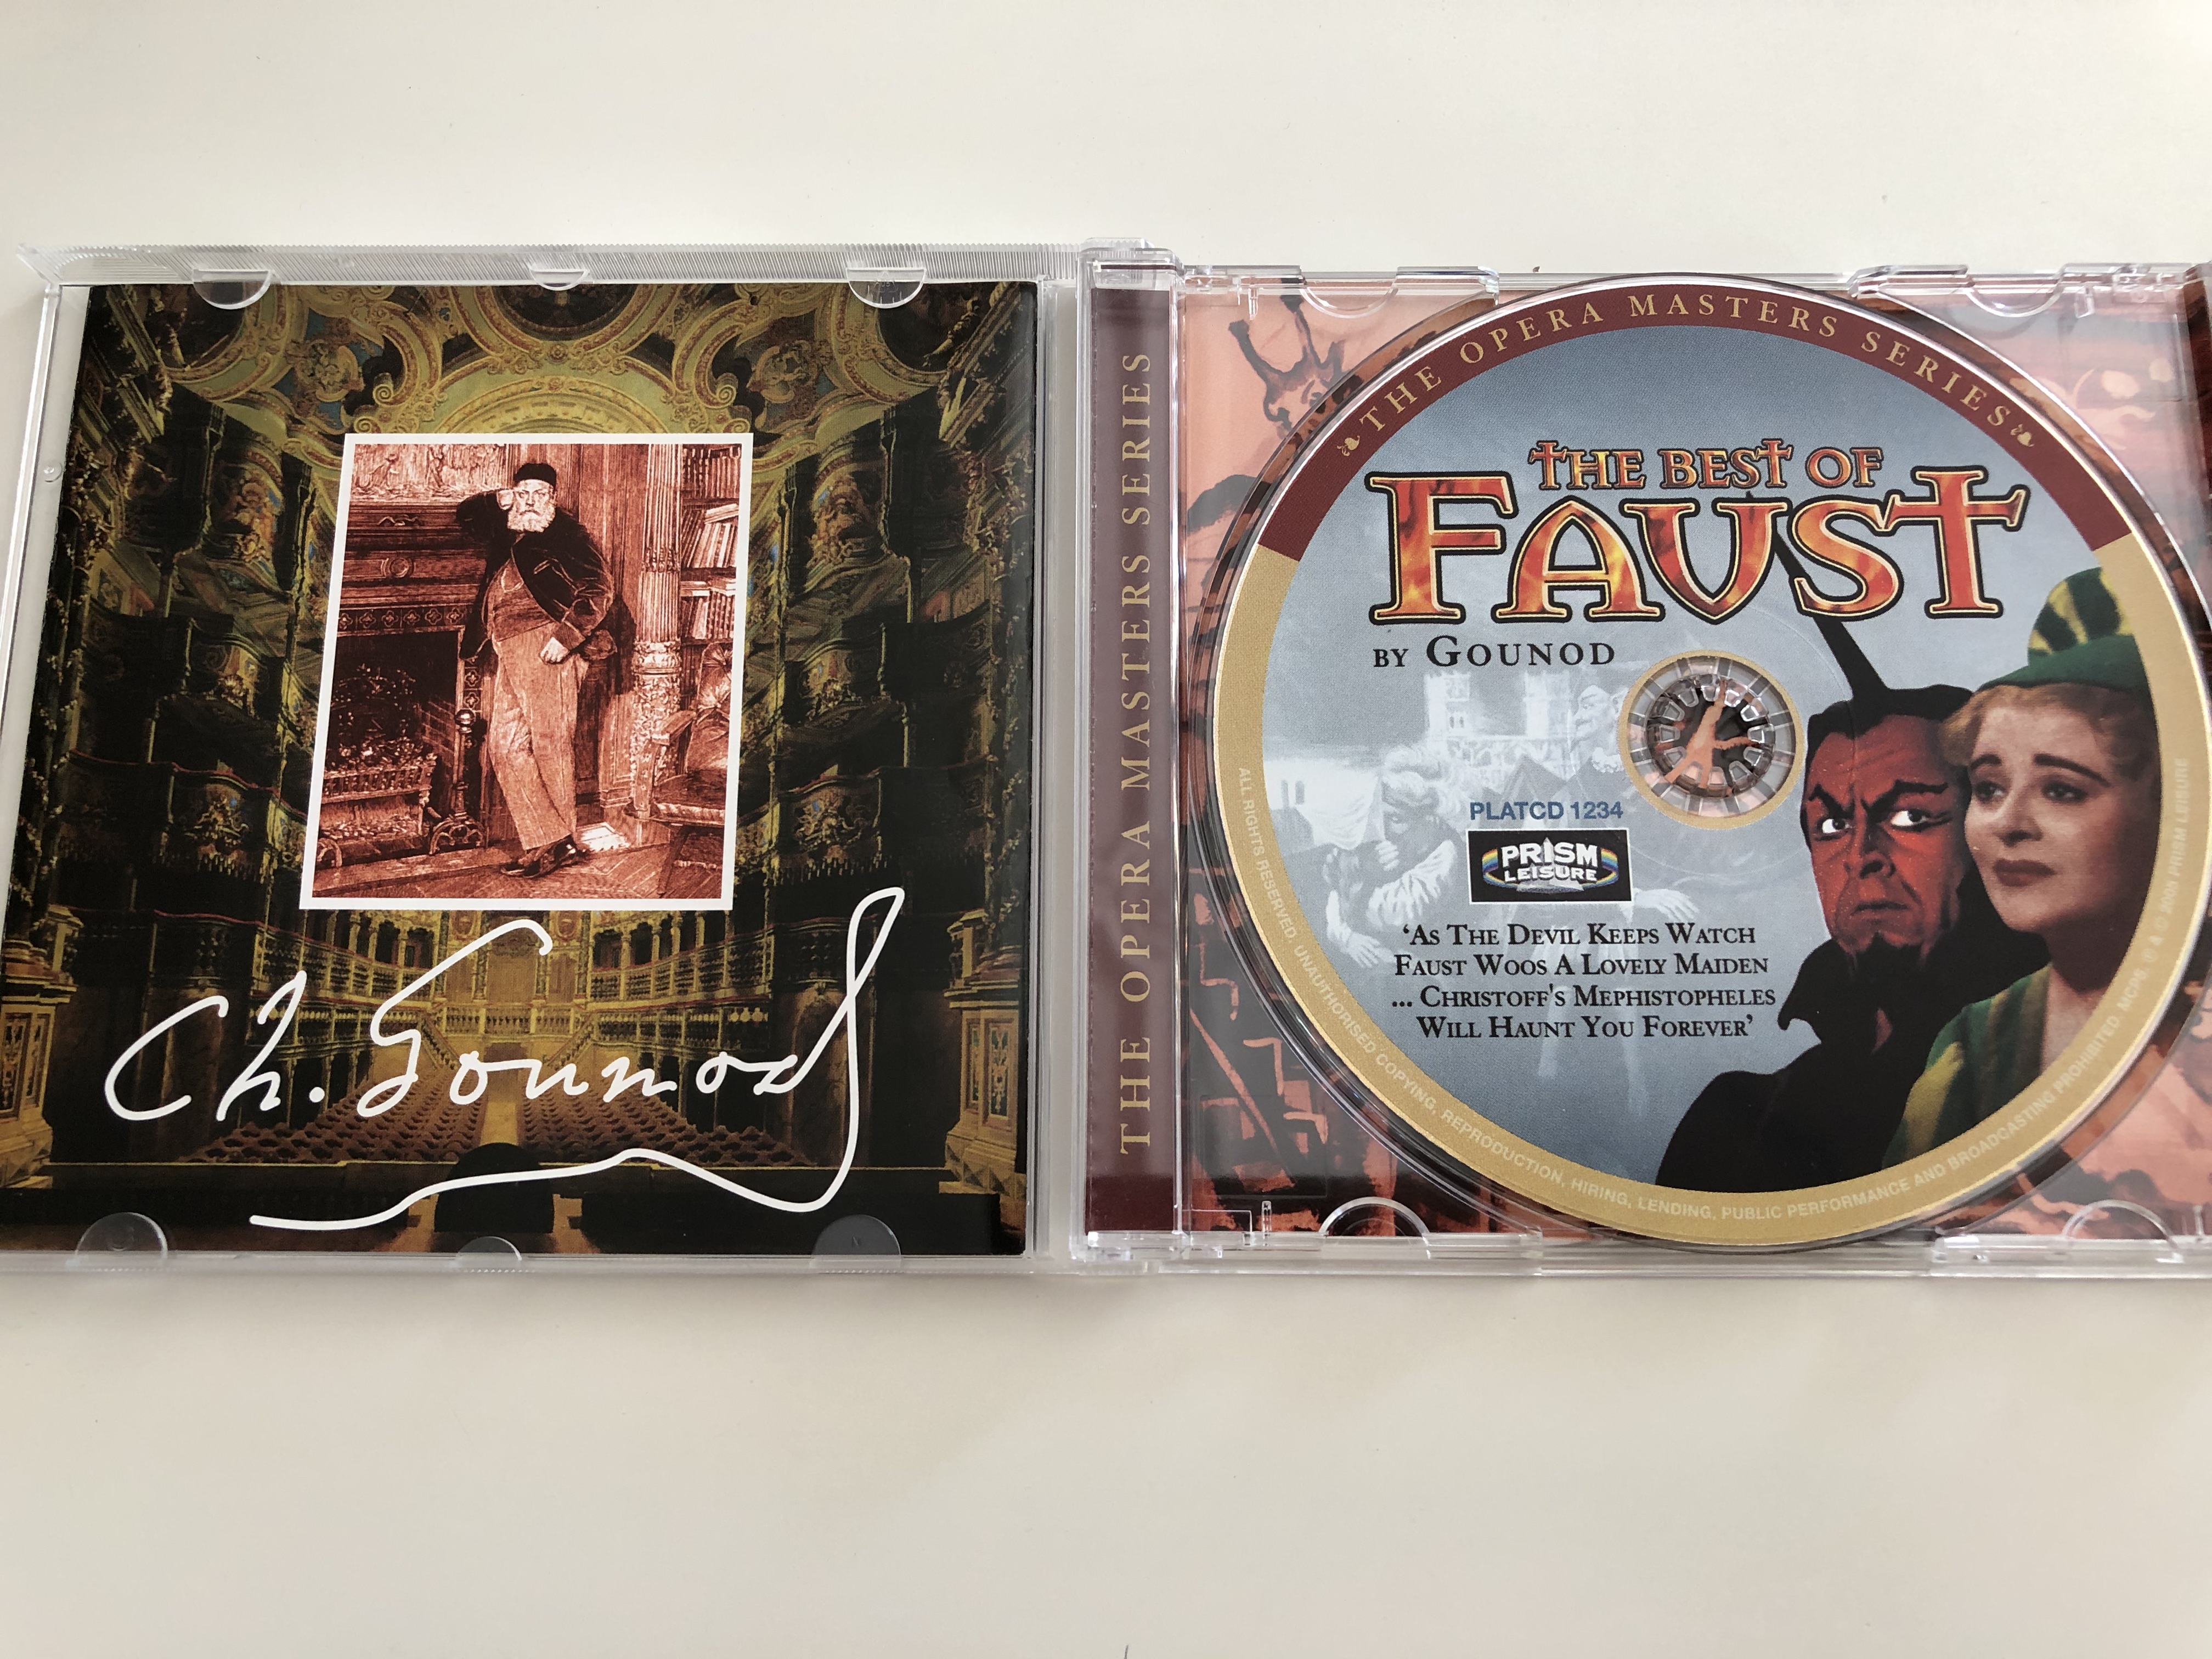 the-best-of-faust-by-gounod-original-recordings-featuring-victoria-de-los-angeles-and-boris-christoff-the-opera-masters-series-audio-cd-2005-platcd-1234-4-.jpg